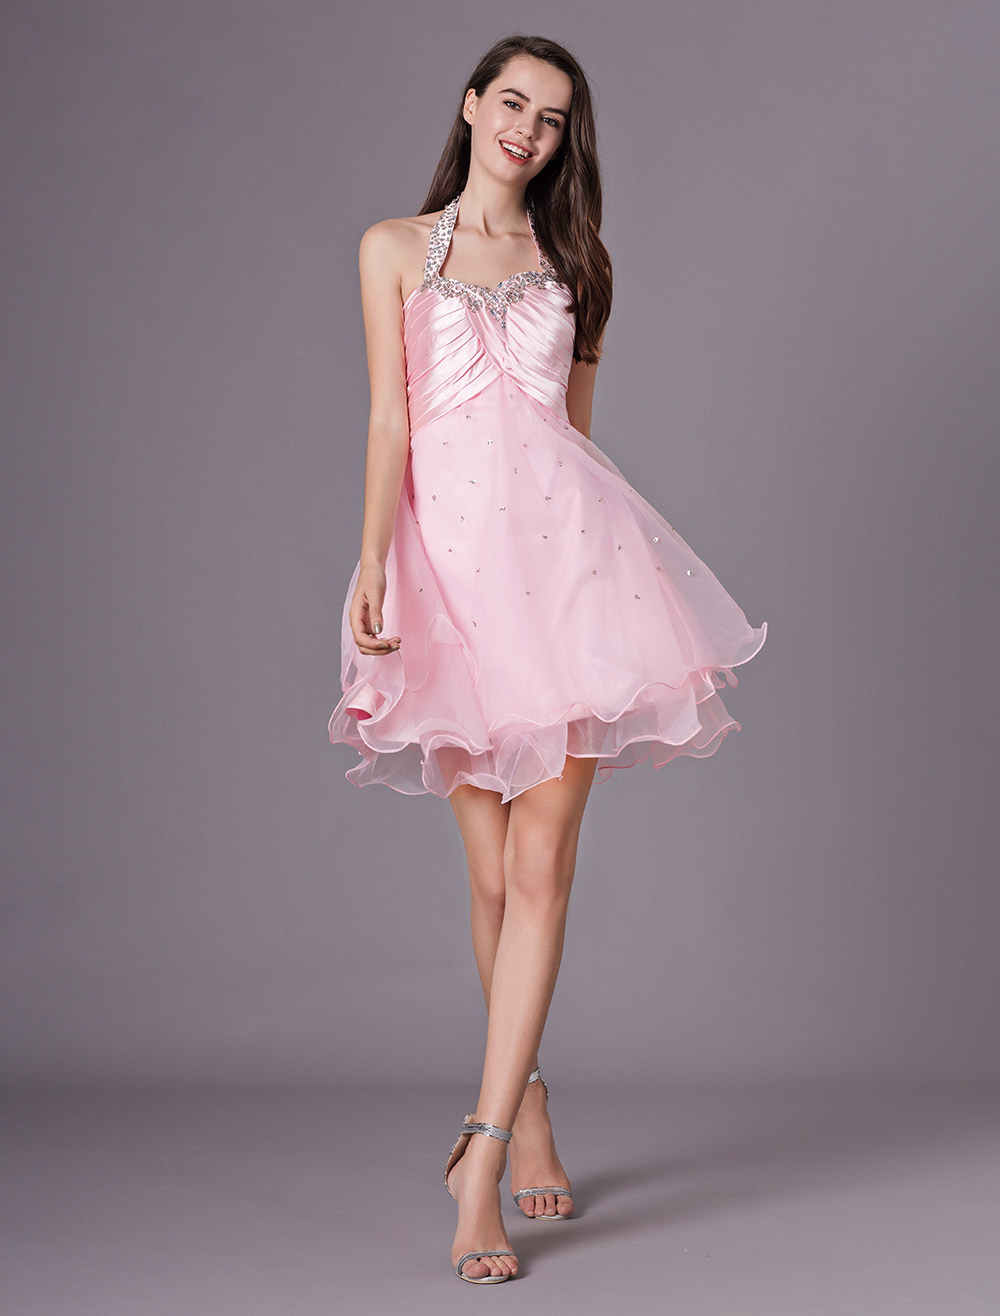 Short Pink Halter Homecoming Dress With Tulle Skirt